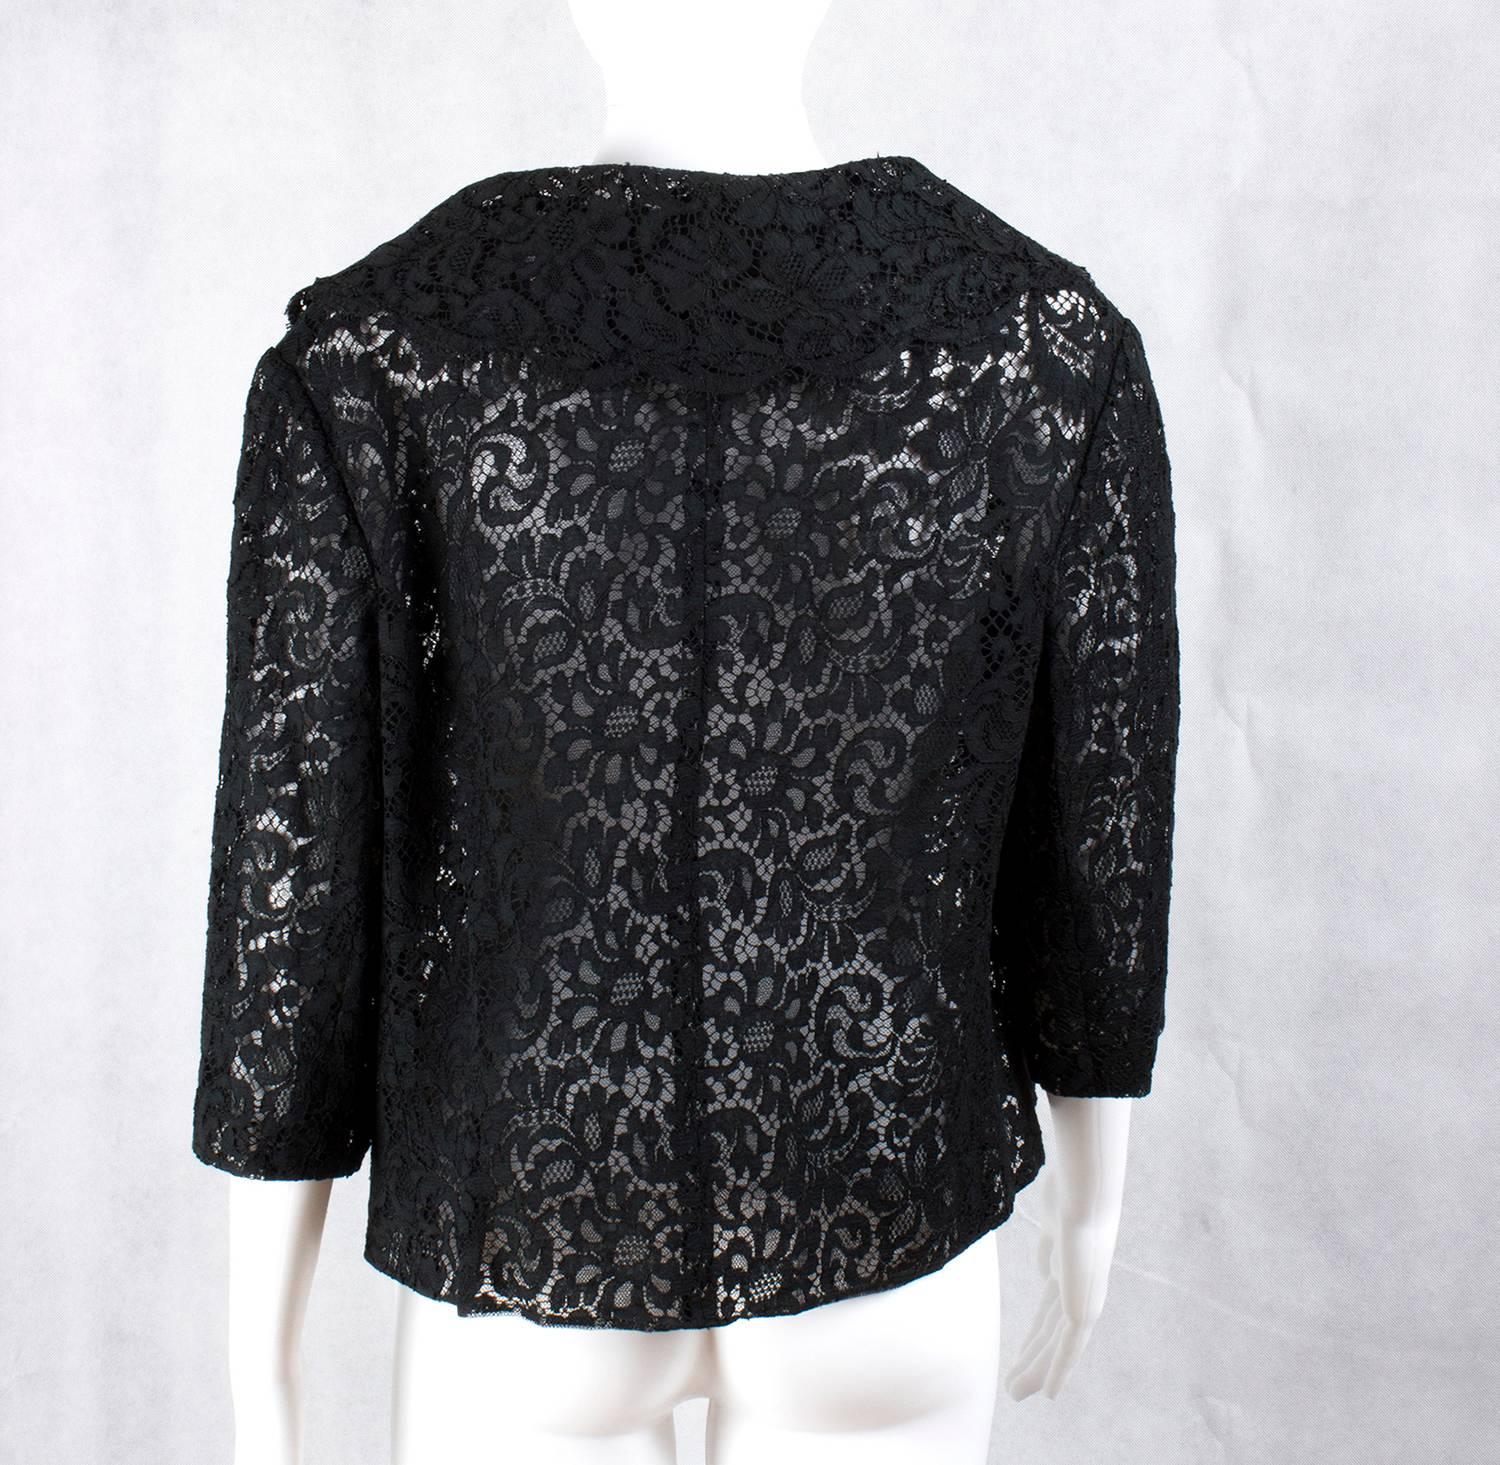 Elegant black lace jacket, 1960s

Size: no size, it seem to be 42-44 It , 10 UK, 6 US
Brand: tailored
Condition: Good Conditions, Some light signs of wear

Approx. Measurements:

- Sleeve's lenght: 37cm 
- Armpit to armpit (flat): 53 cm
- Total